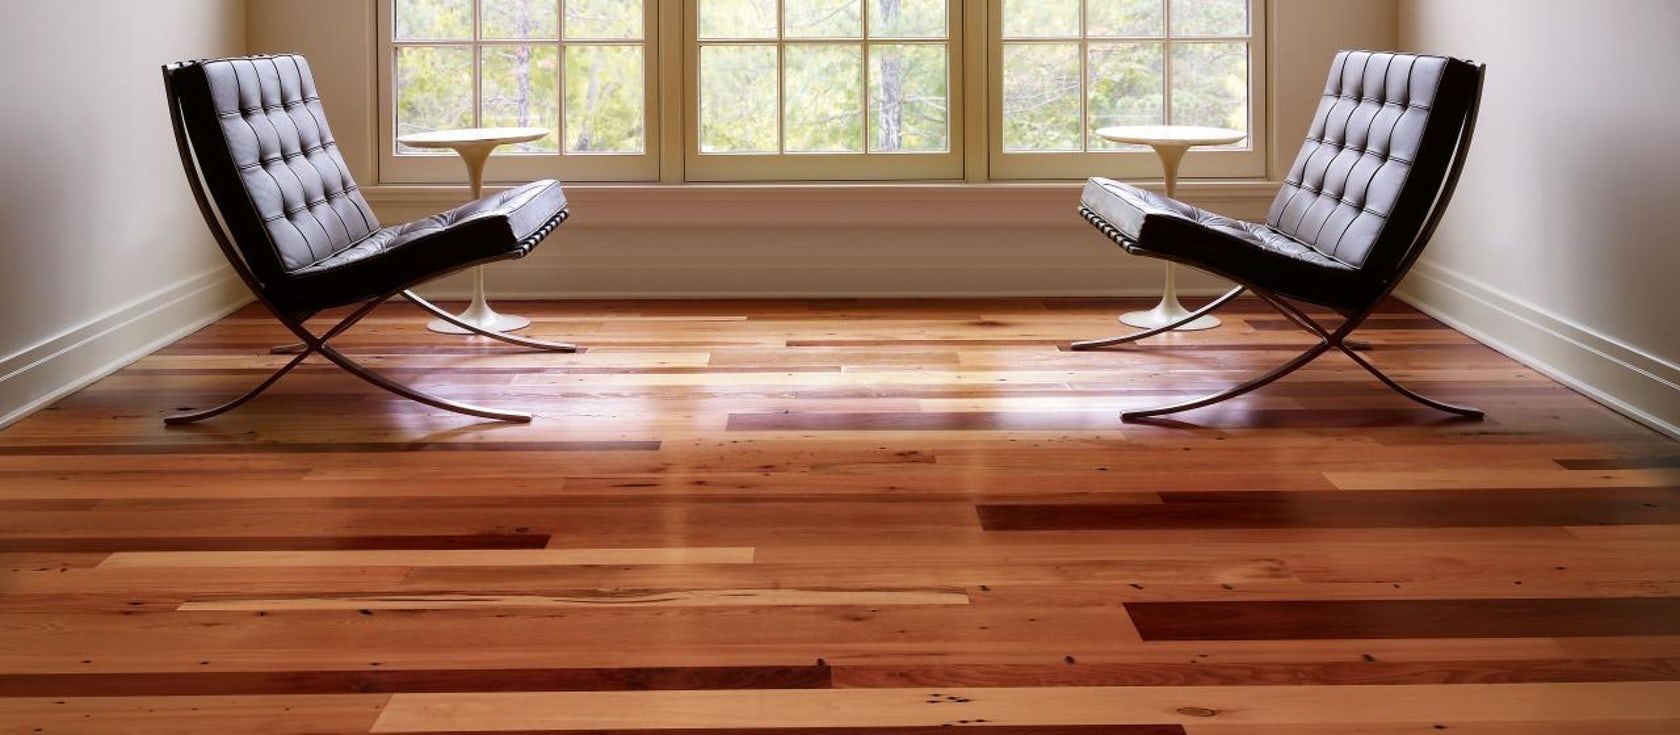 An Architect's Guide To: Wood Flooring - Architizer Journal